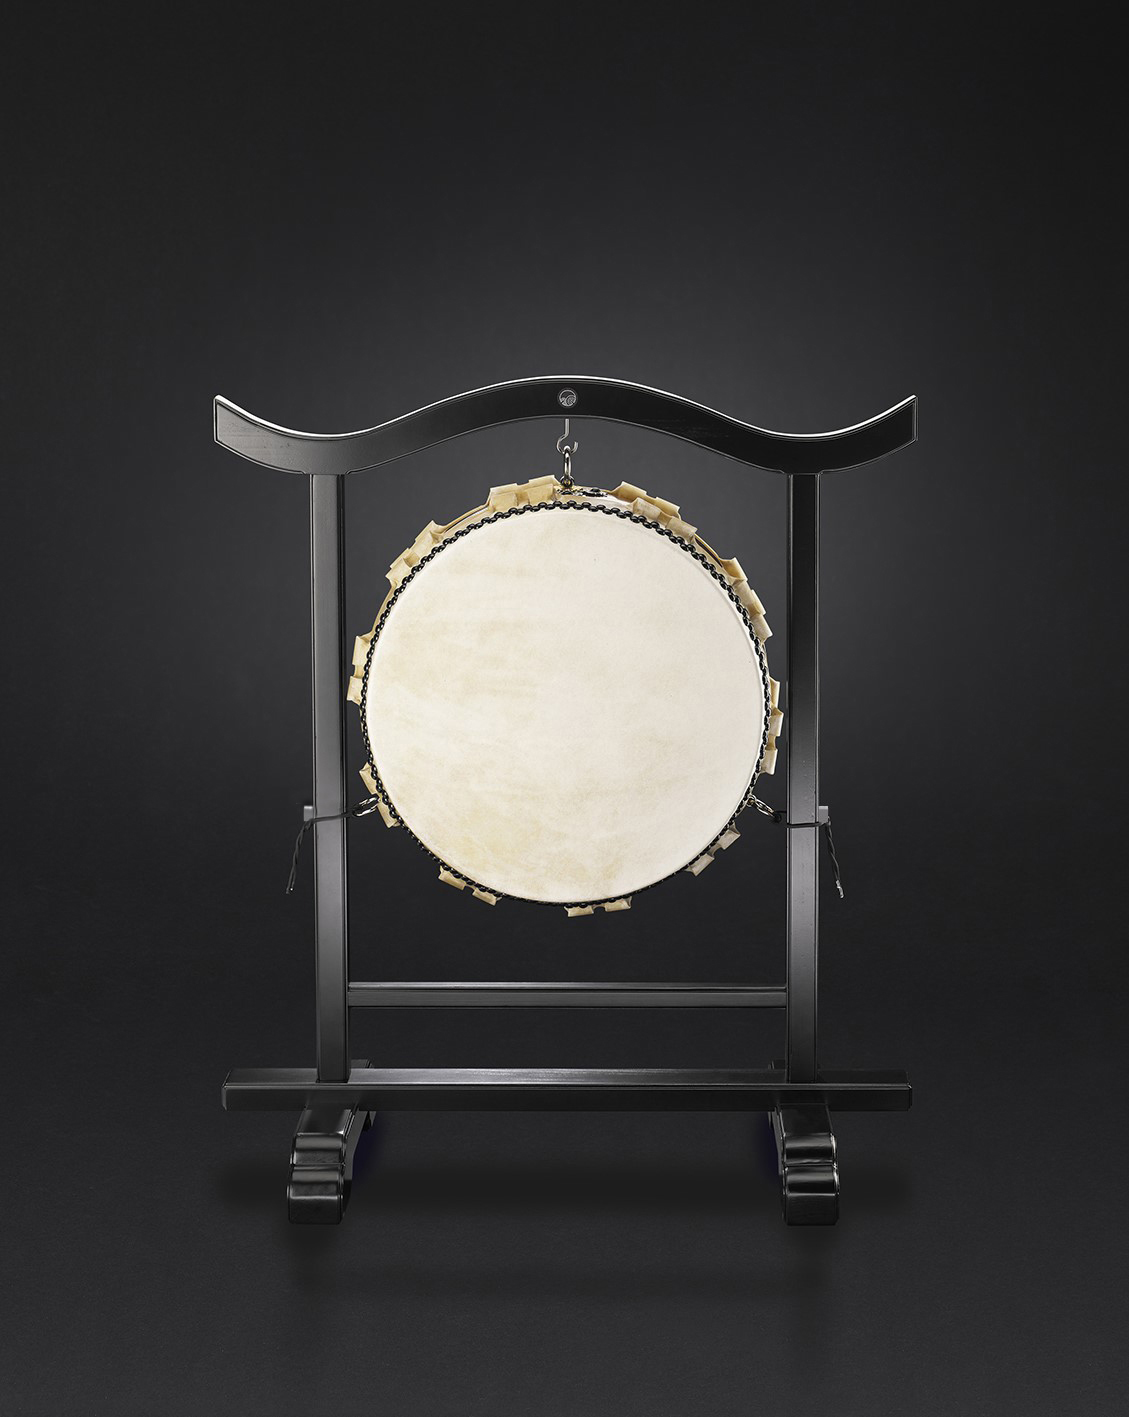 Hira-Daiko temple stand for Ø48cm  (325€)  